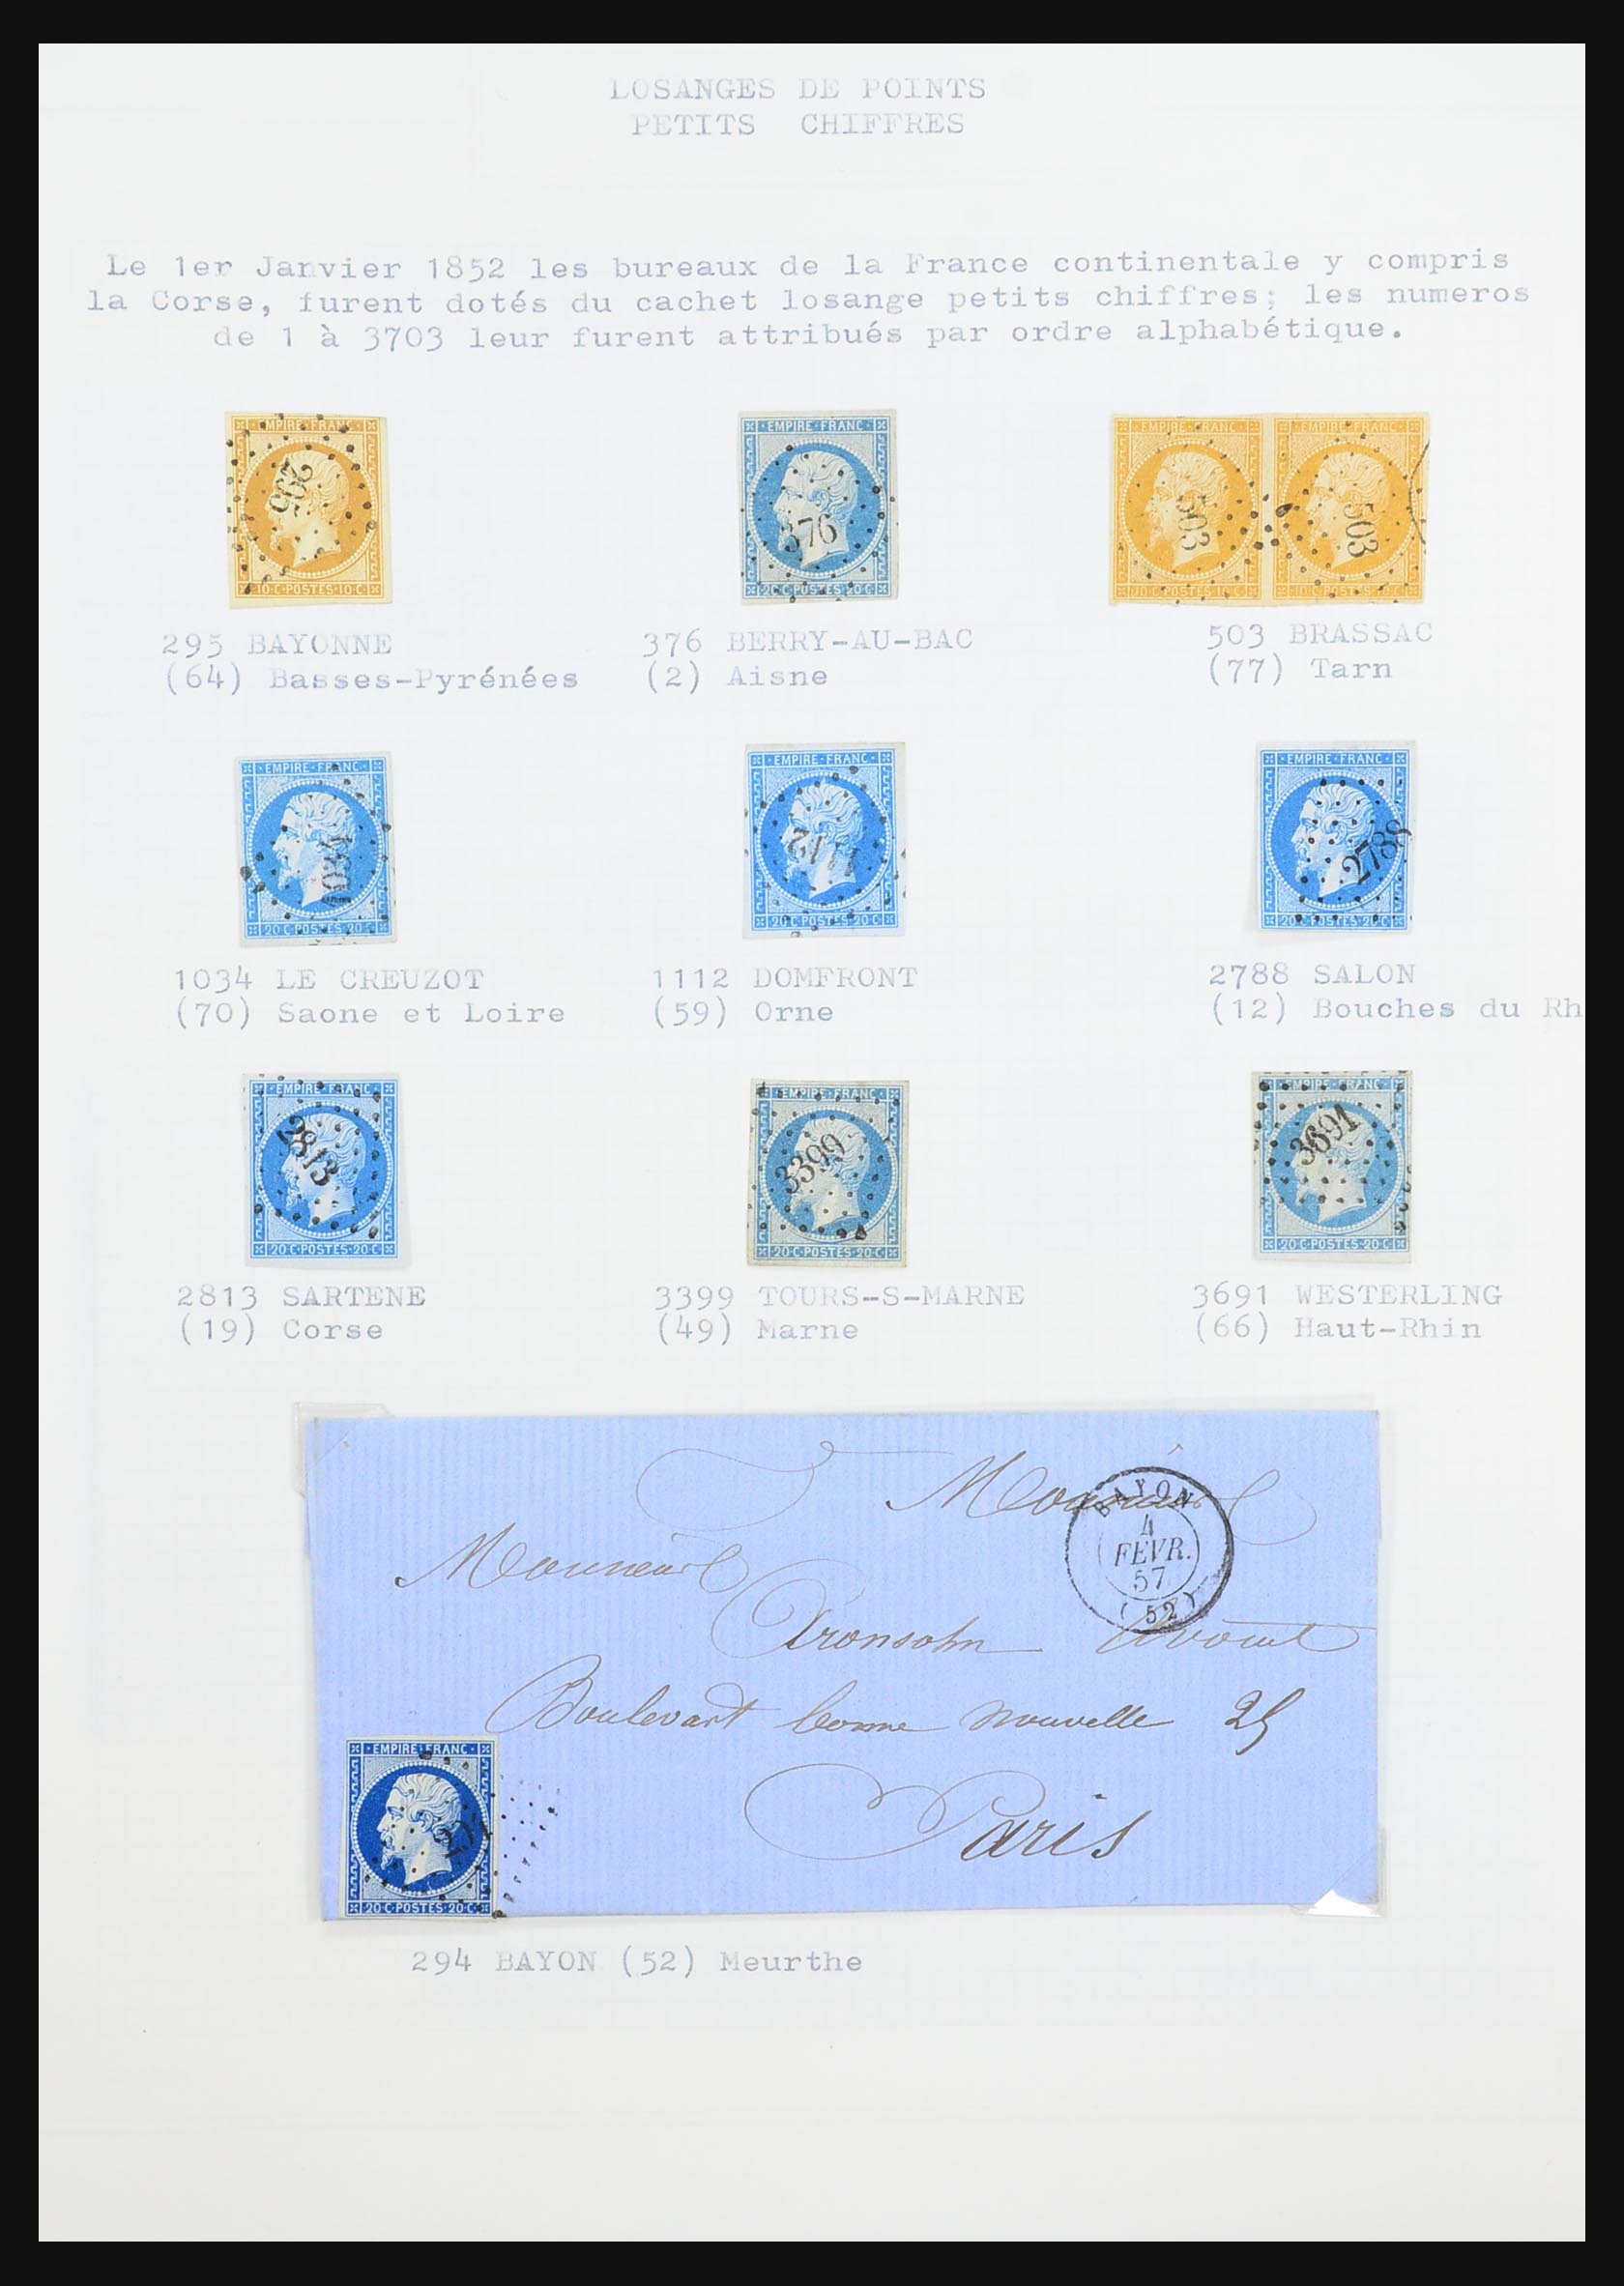 31526 032 - 31526 France covers and cancels 1725 (!)-1900.